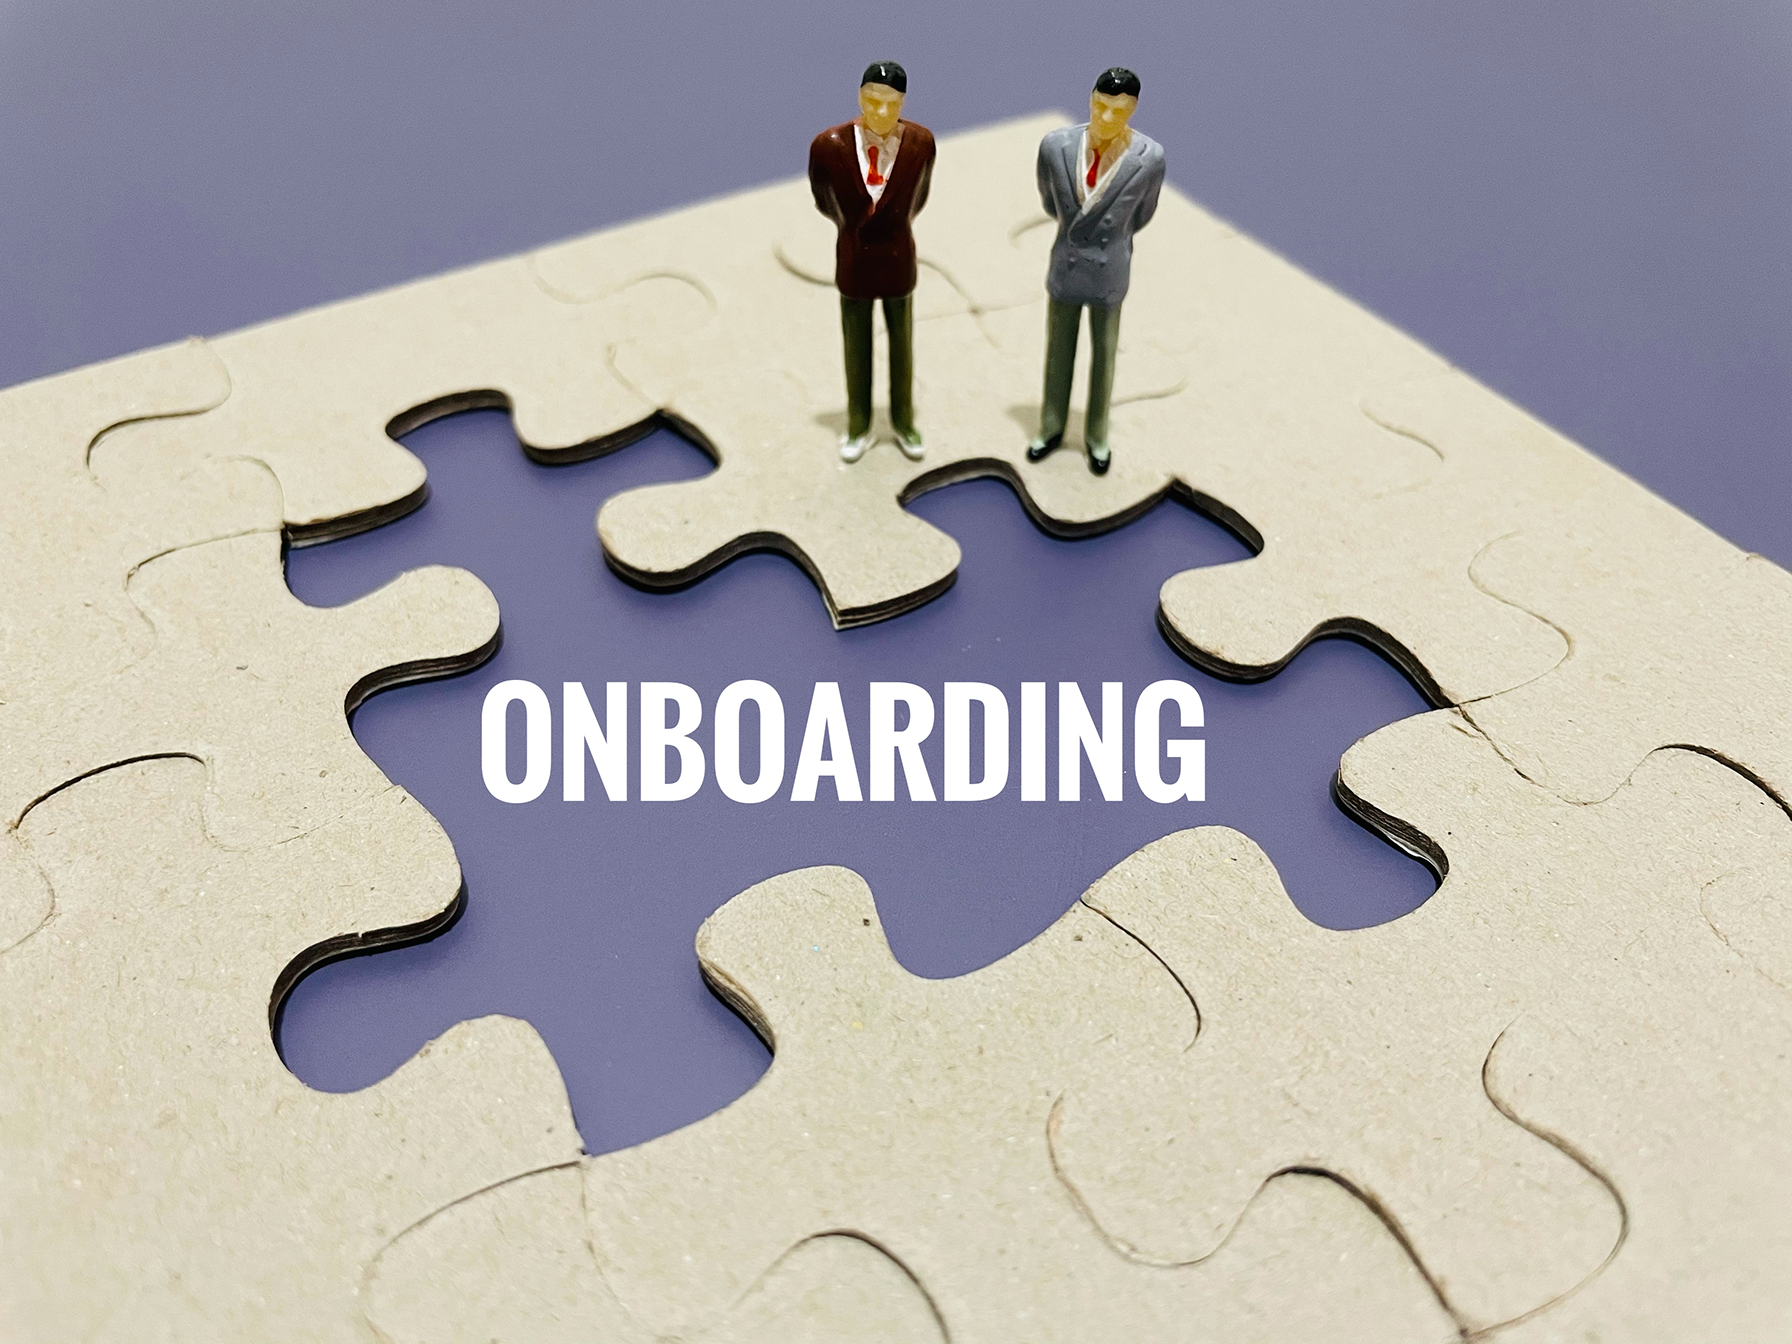 Onboarding in health and social care - The Mandatory Training Group UK -.png__PID:84e7cce5-17f2-4f47-af86-ef2bc5b4d250